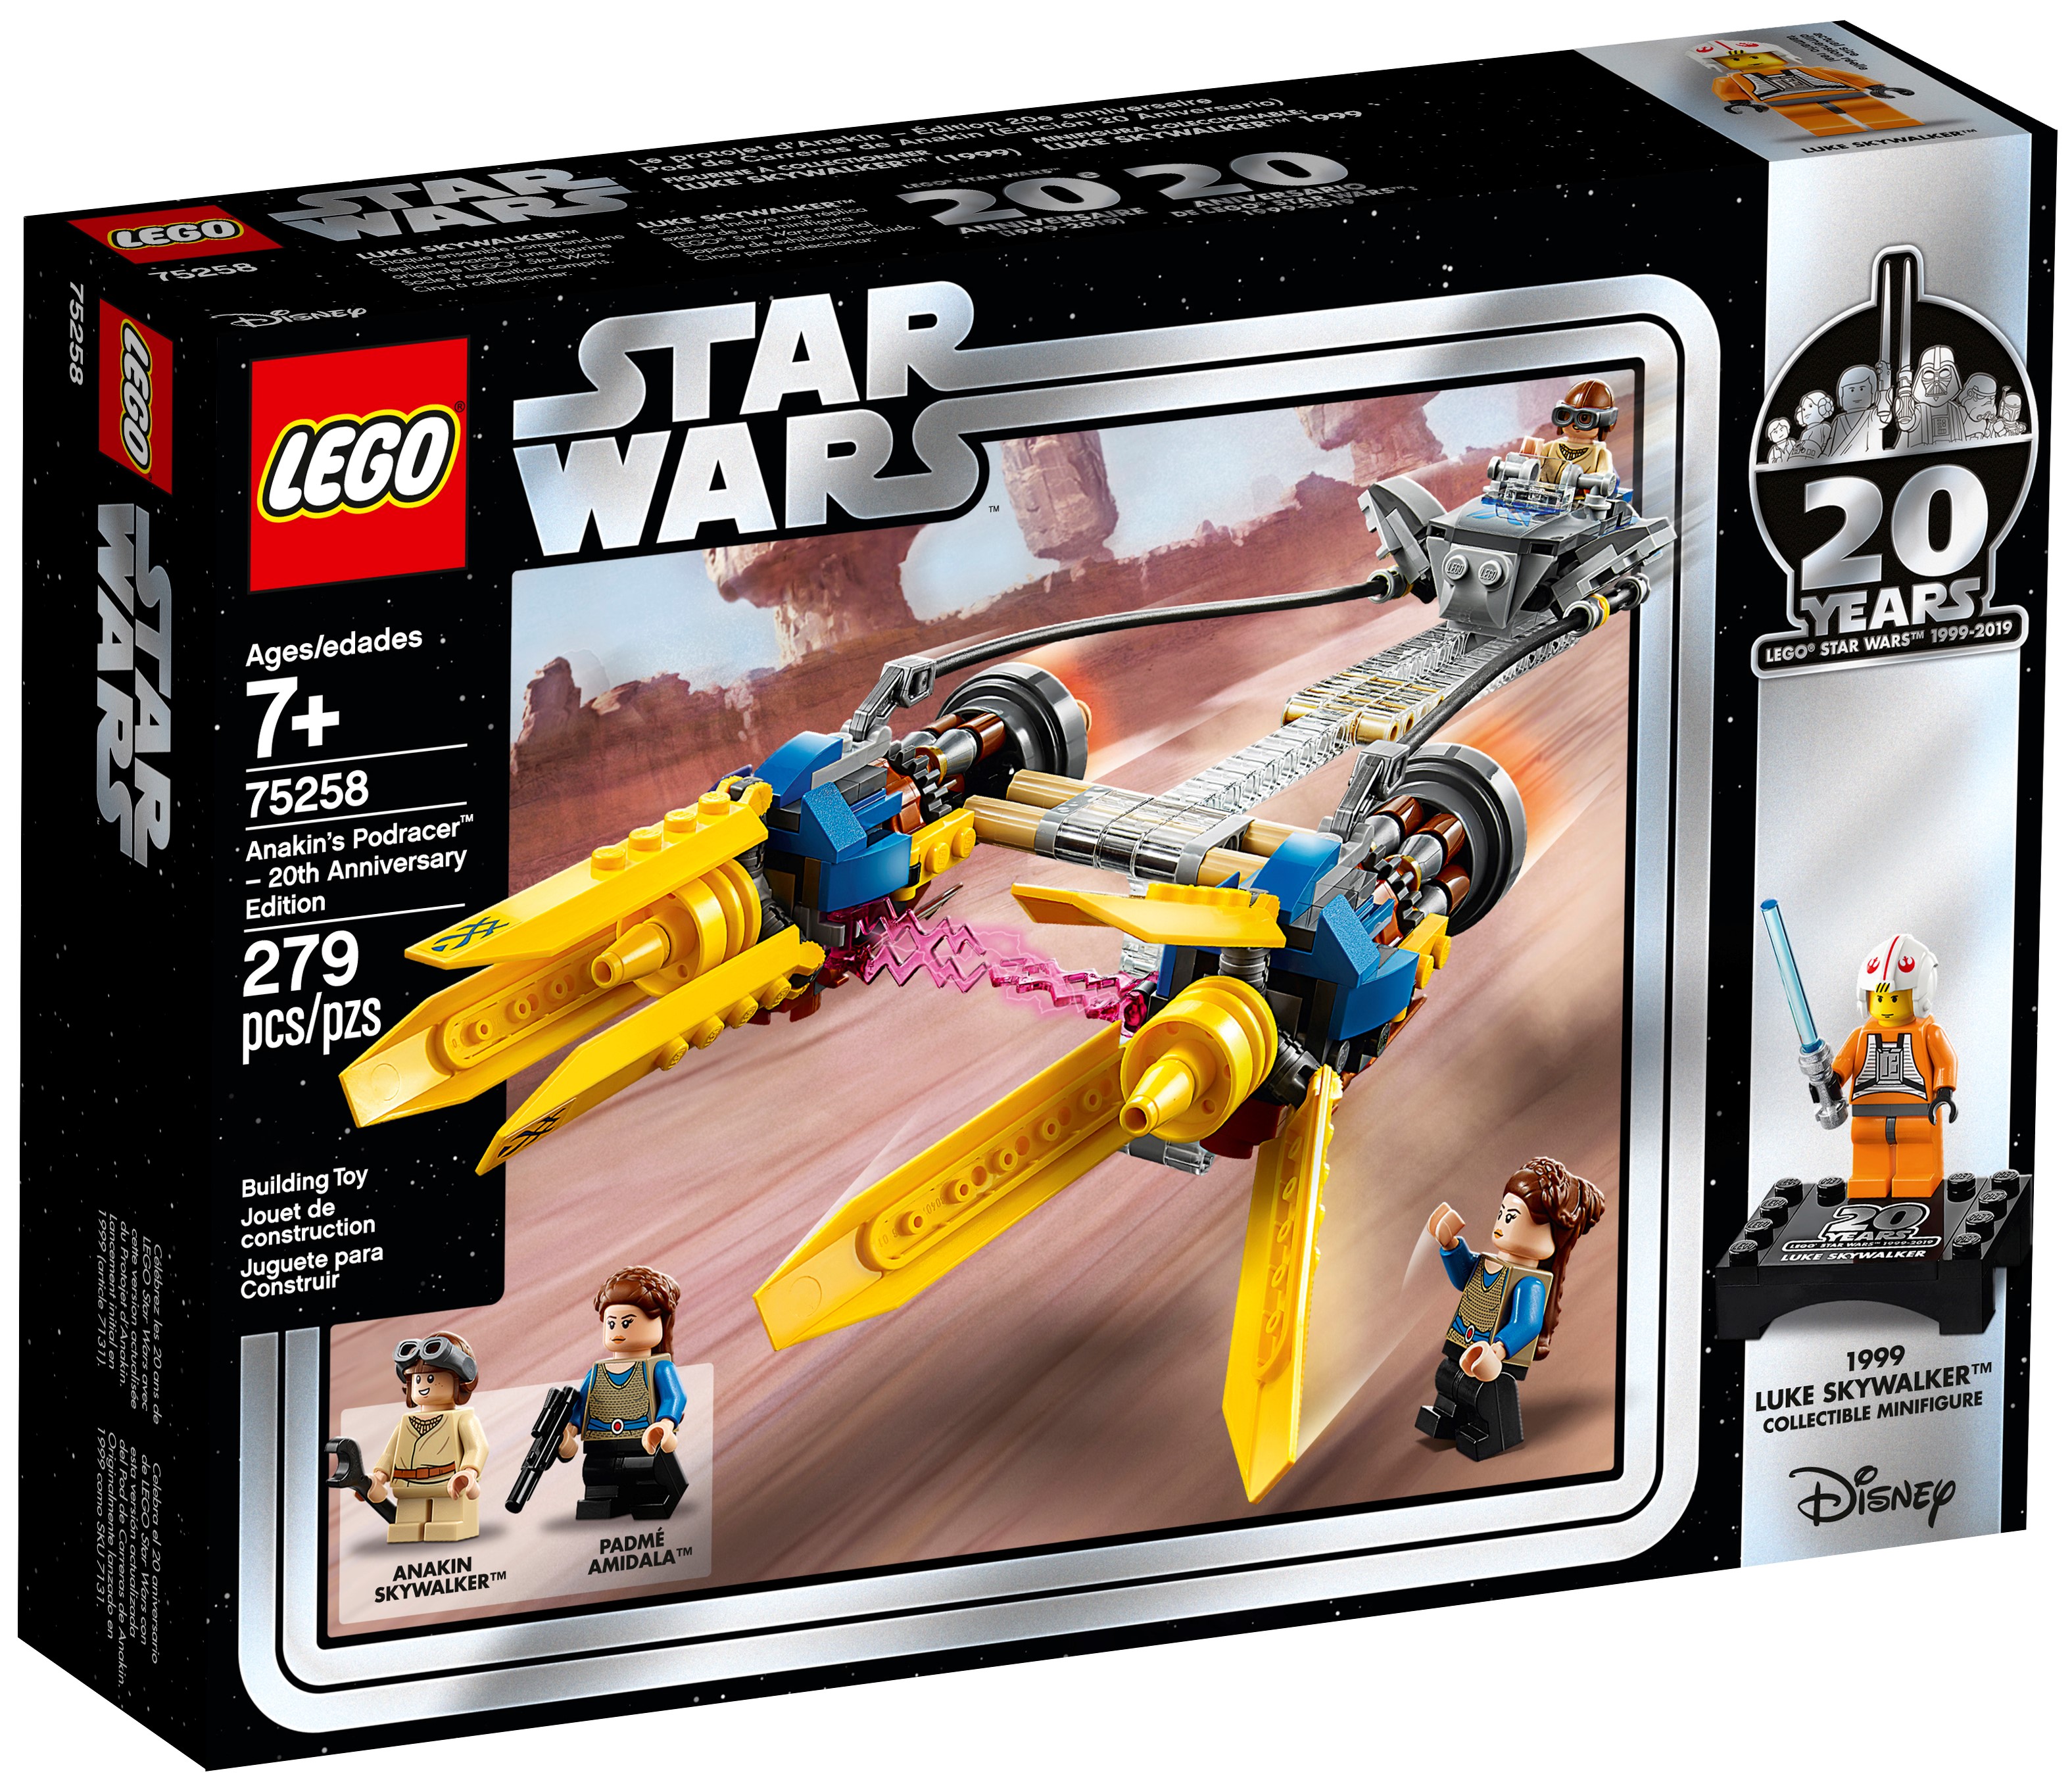 Anakin's Podracer™ 20th Anniversary Edition 75258 | Star Wars™ Buy online at Official LEGO® Shop US